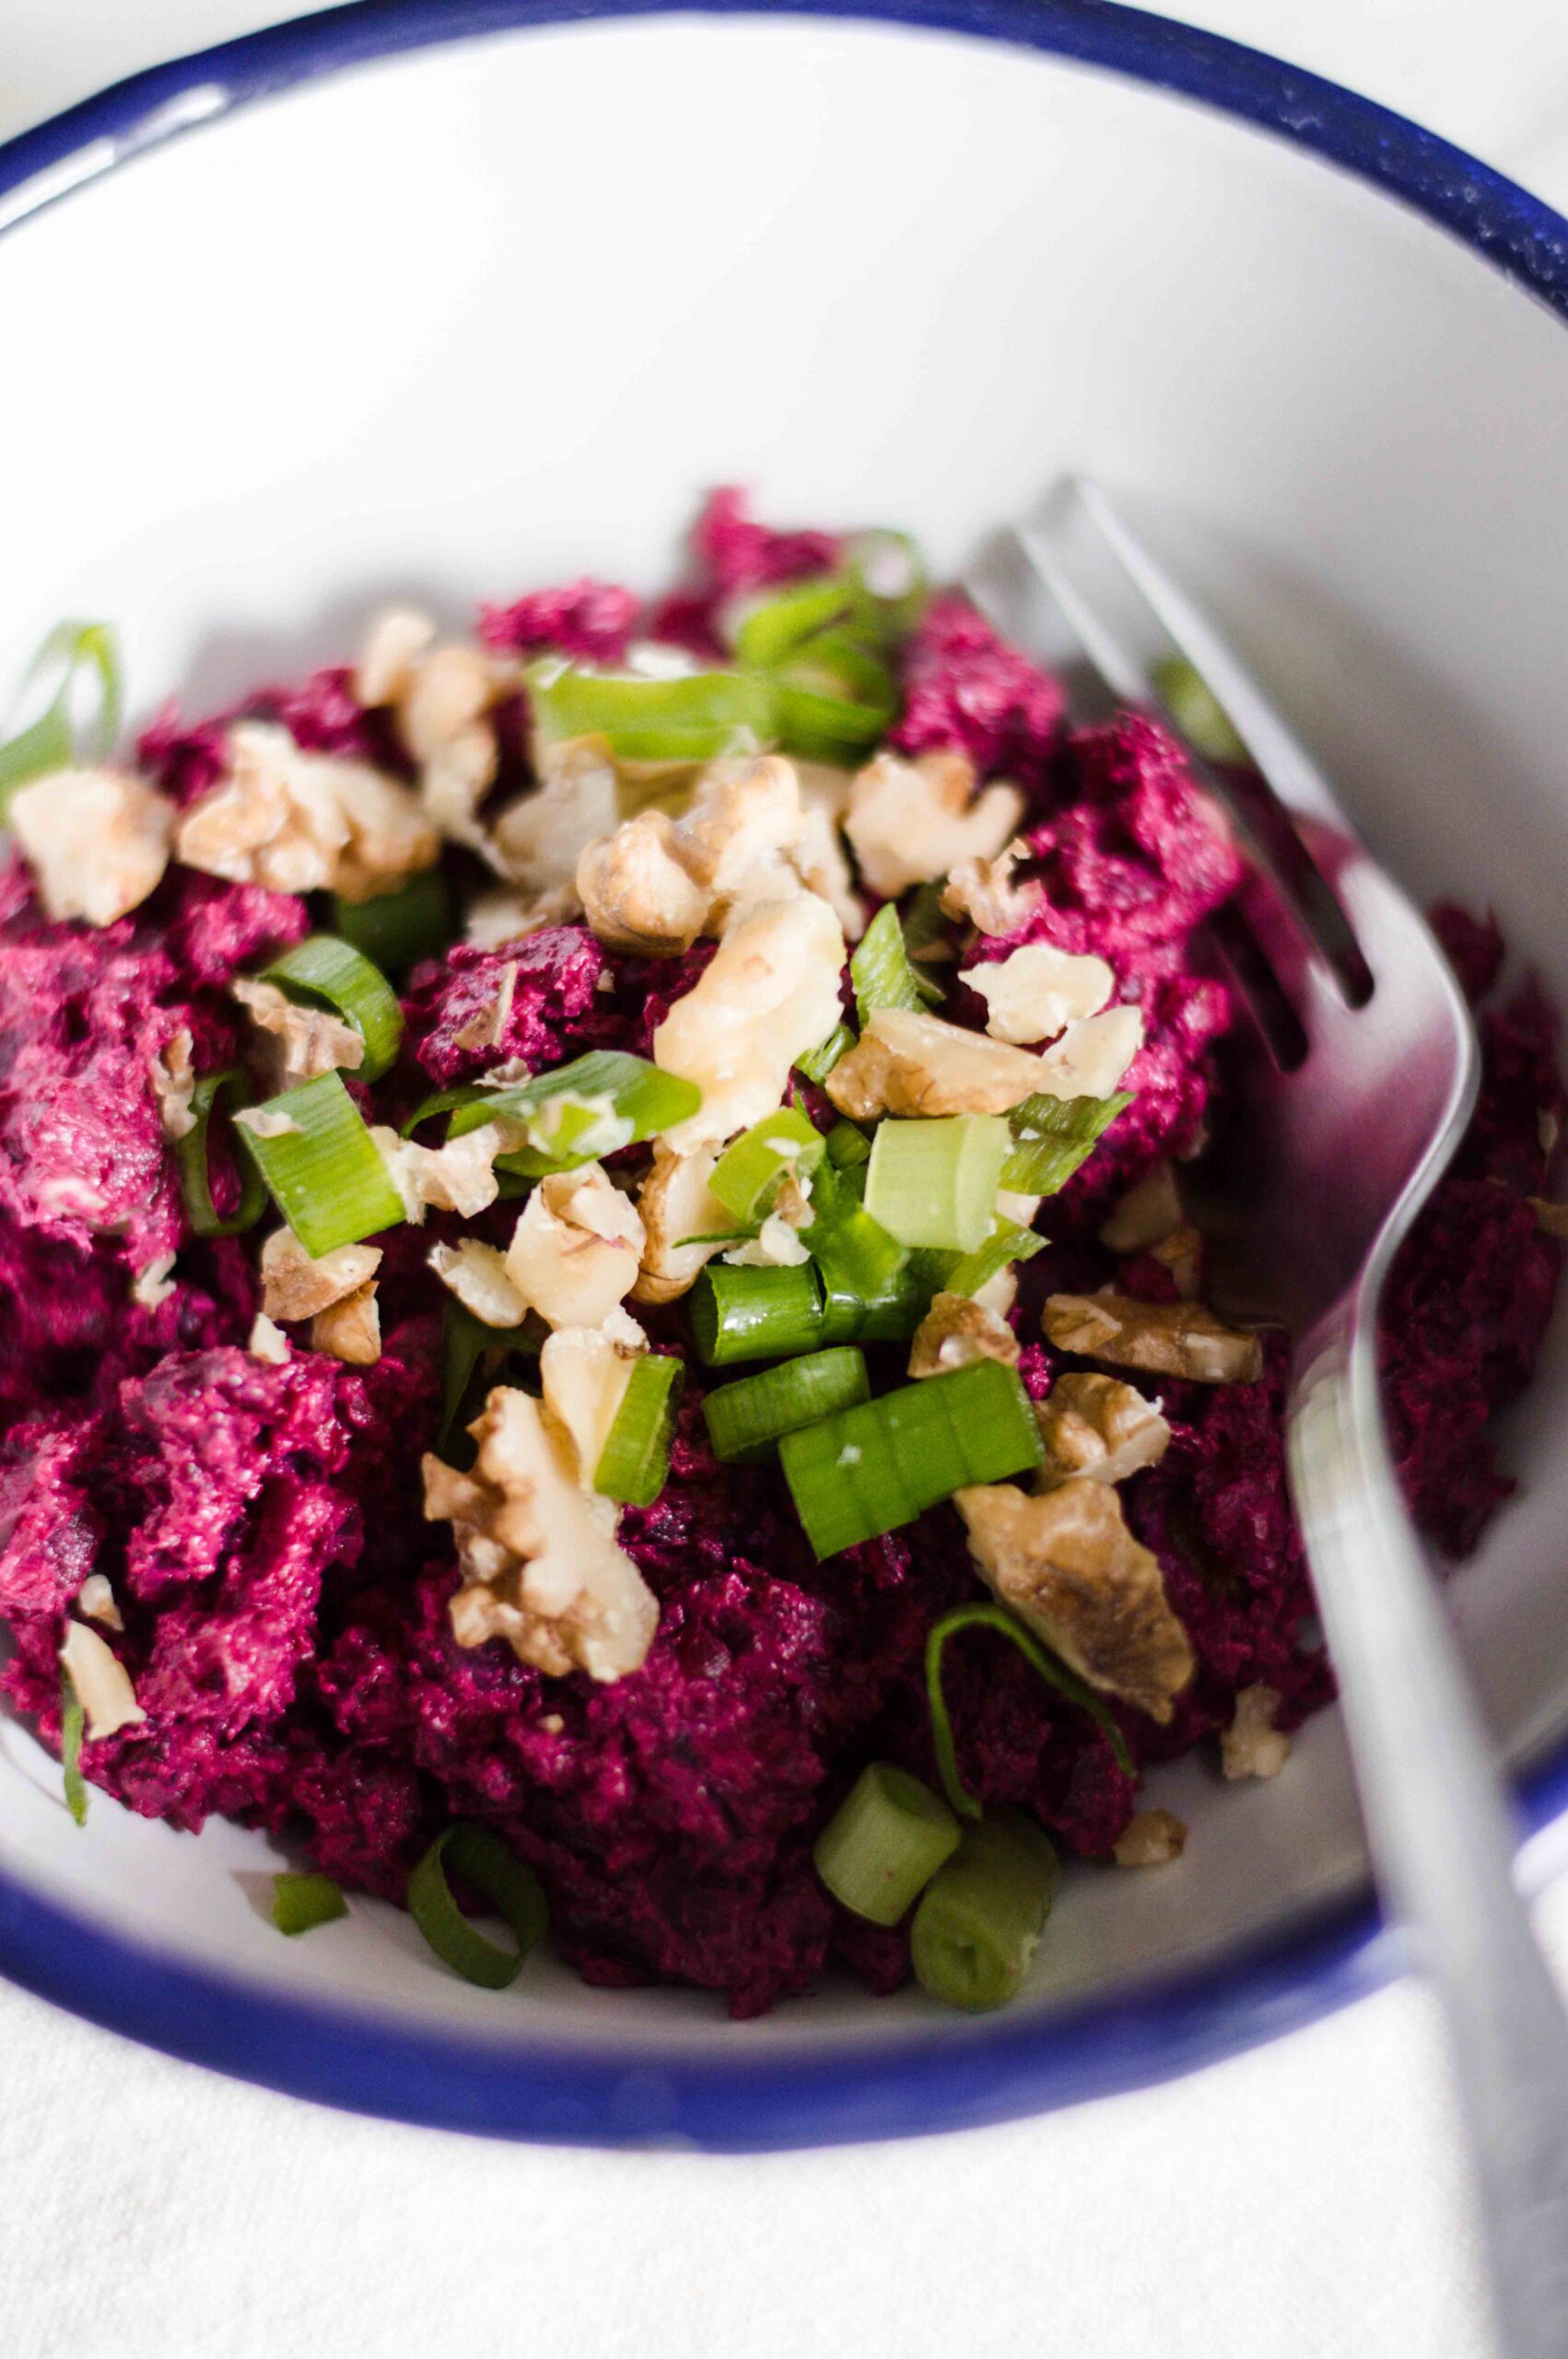 Russian Beet Salad With Tvorog and Walnuts | That’s What She Had